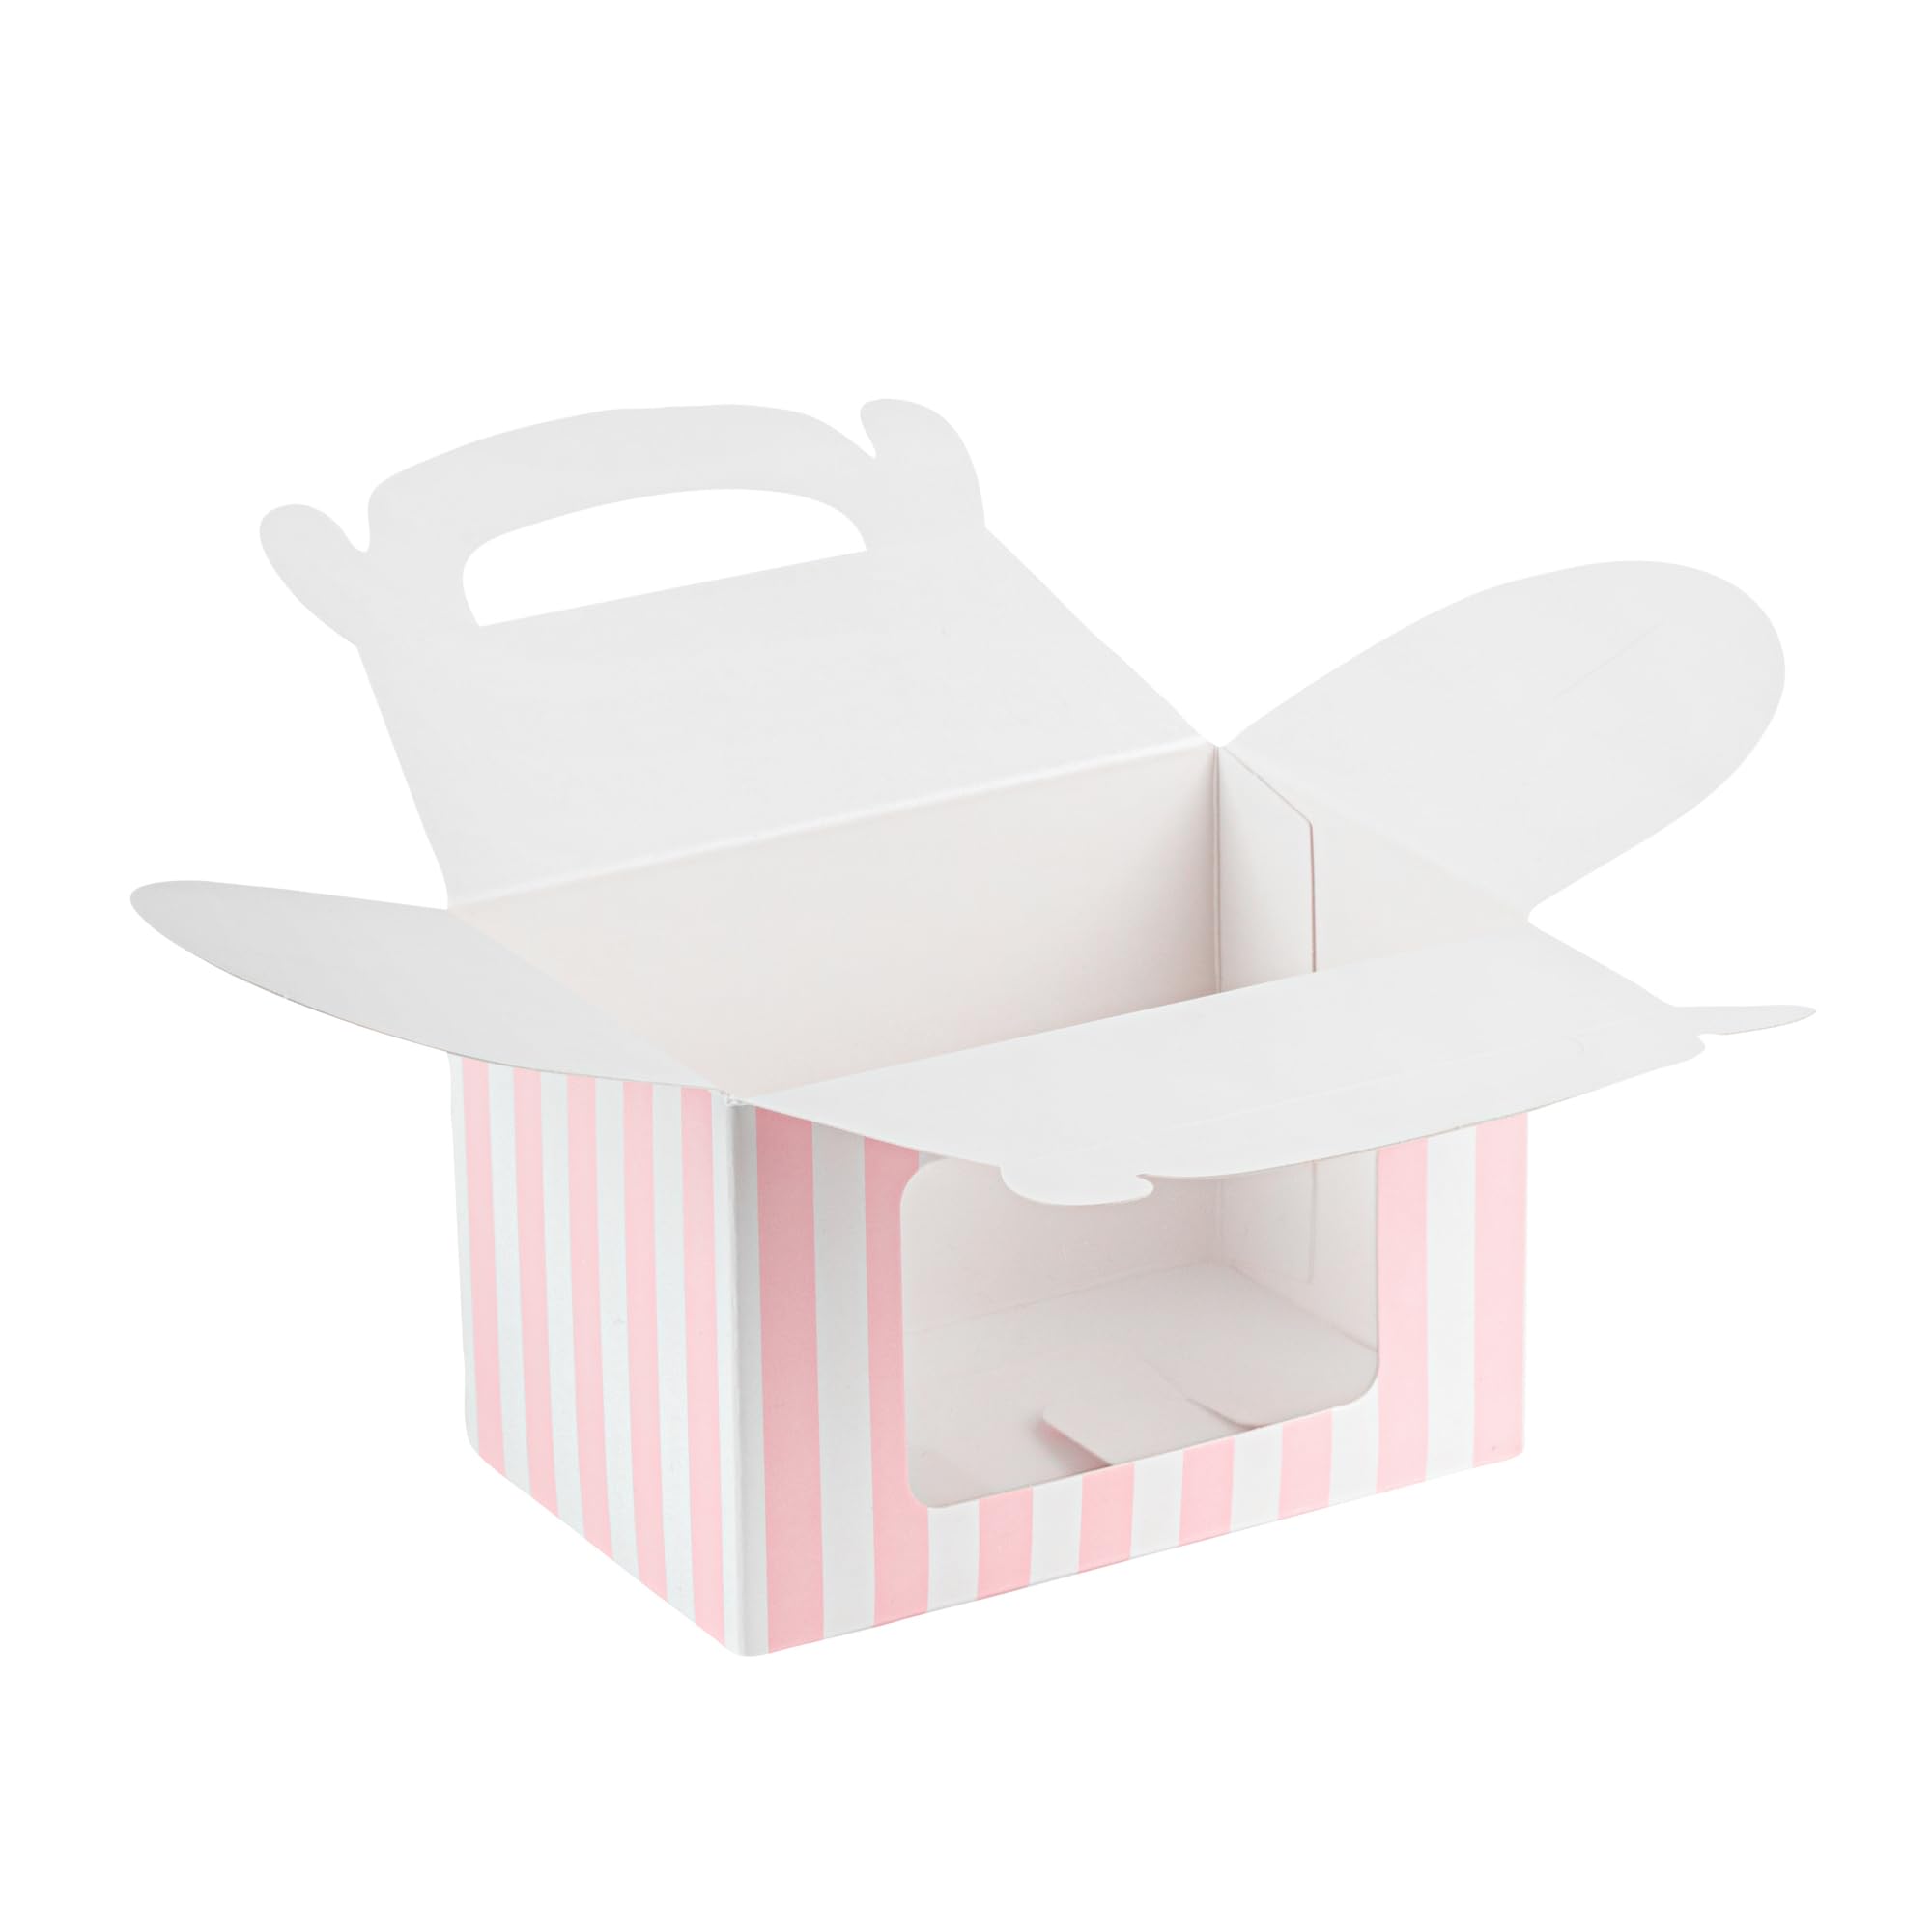 Bio Tek 6 x 3.5 x 6.5 Inch Gable Boxes For Party Favors, 25 Durable Gift Treat Boxes - Striped Pattern, Pink And White Paper Barn Boxes, Clear PET Window, With Built-In Handle - Restaurantware